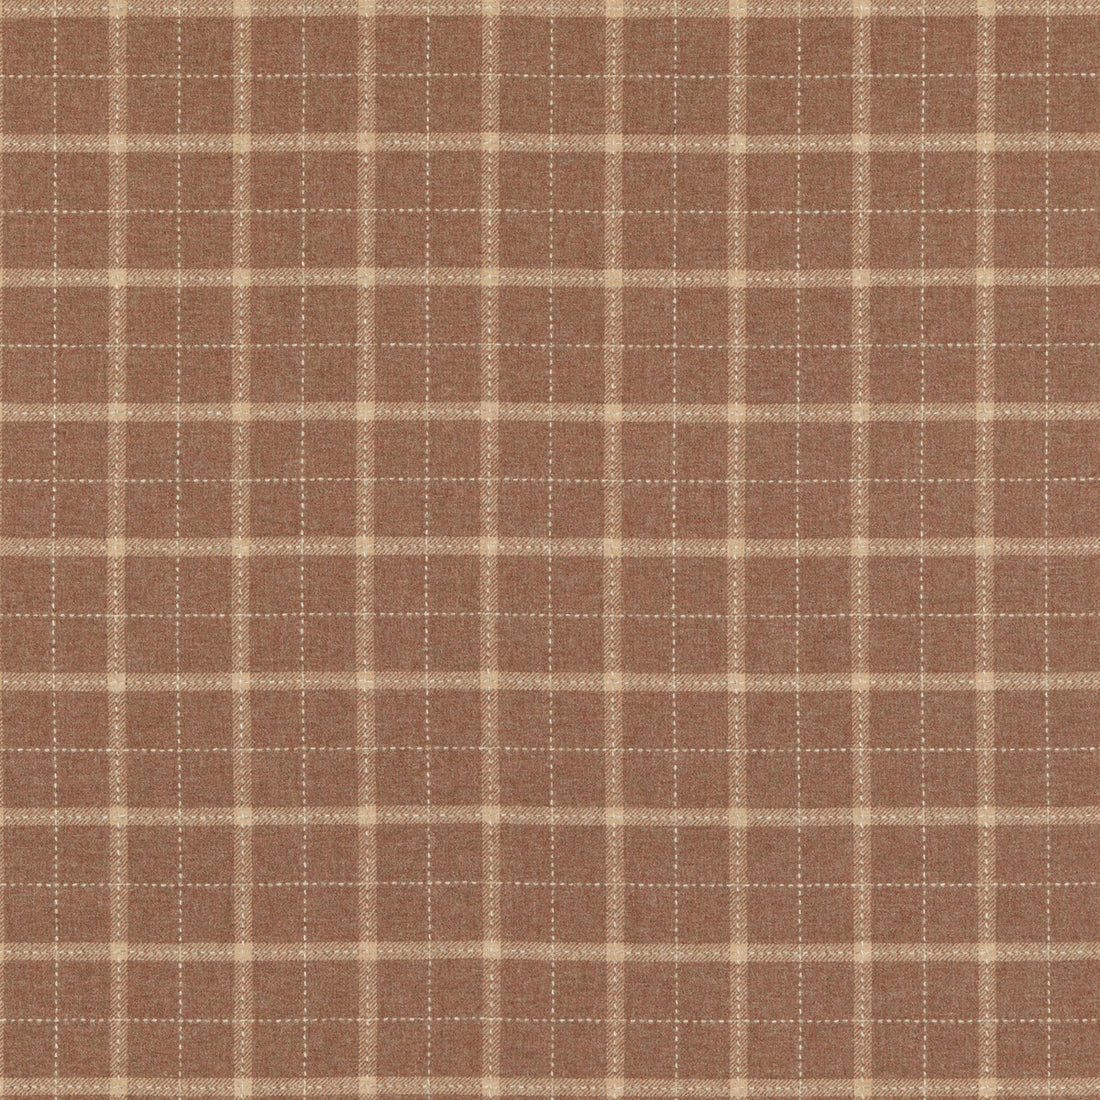 Bowmont fabric in russet color - pattern FD806.V55.0 - by Mulberry in the Mulberry Wools IV collection